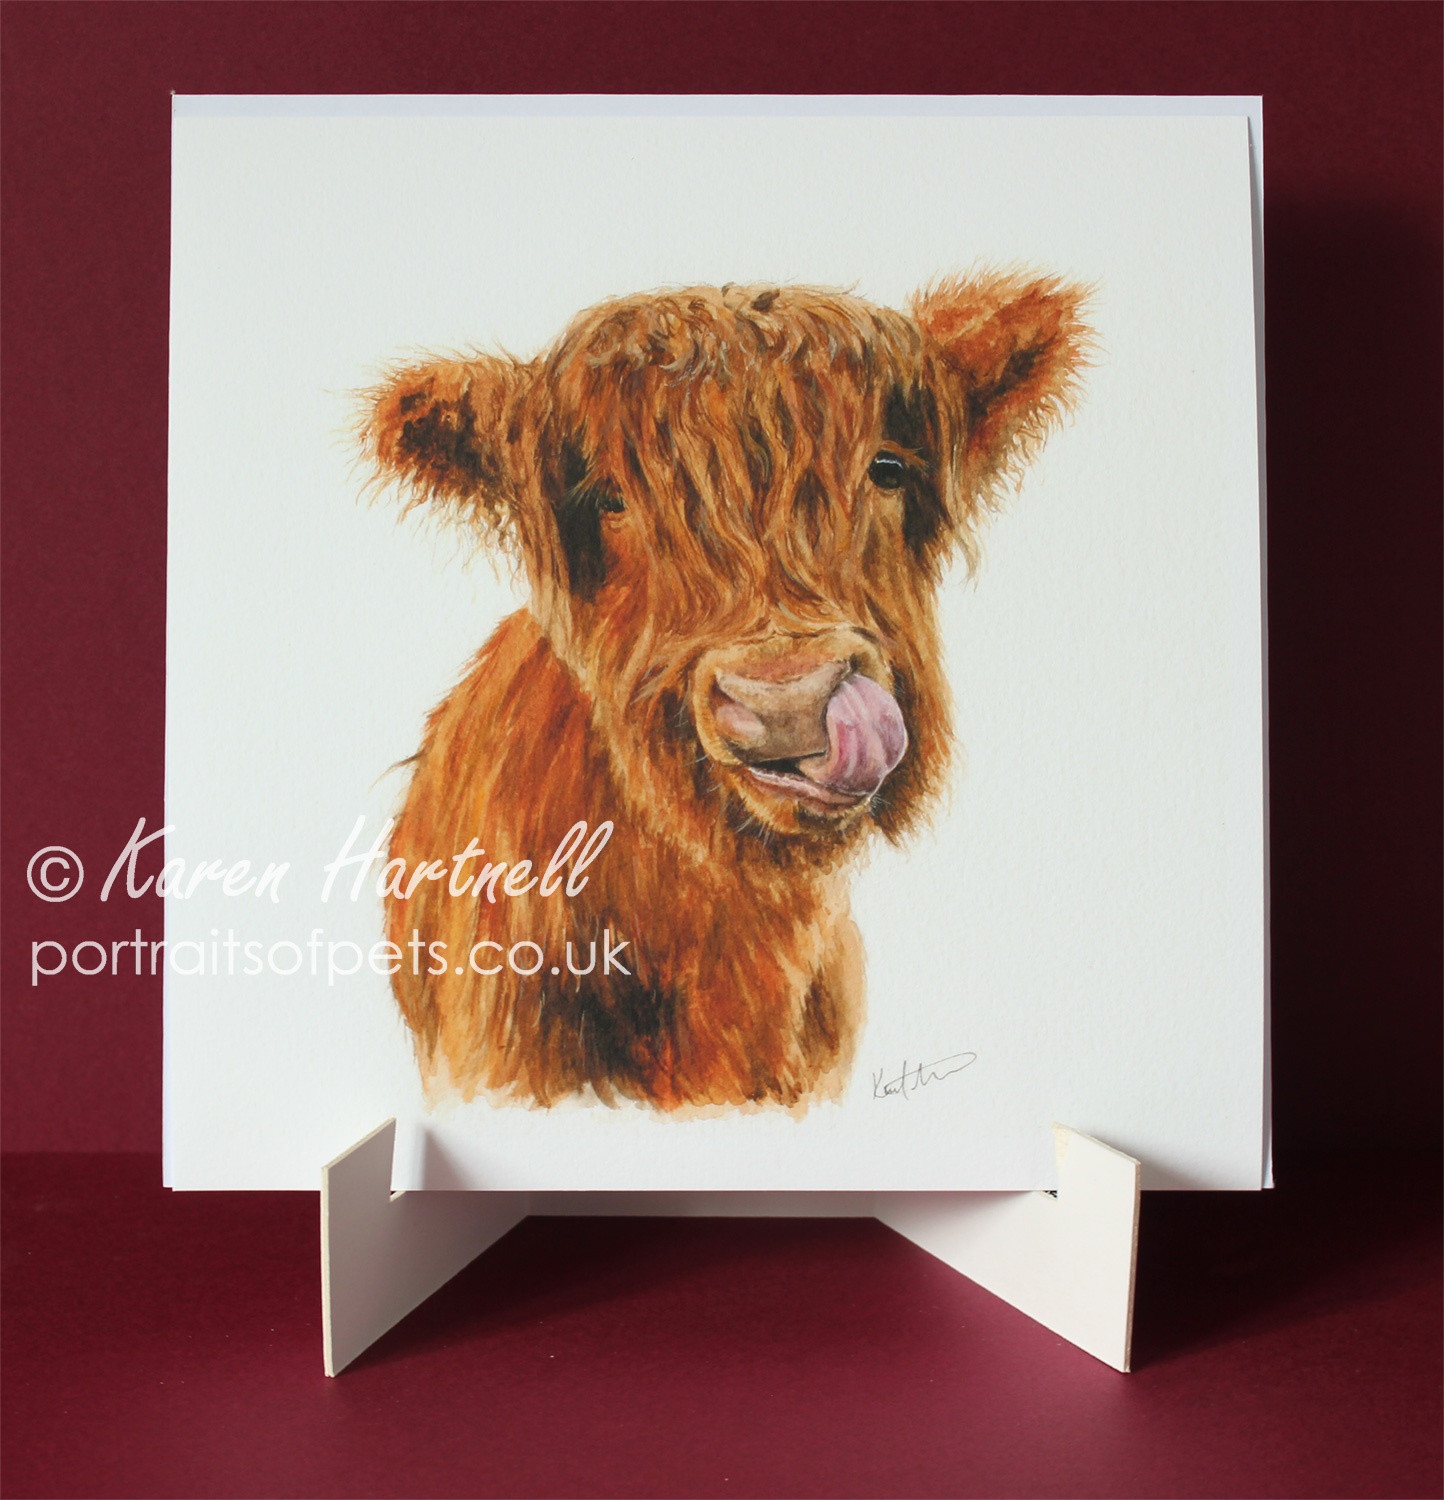 Young Highland Cow, print